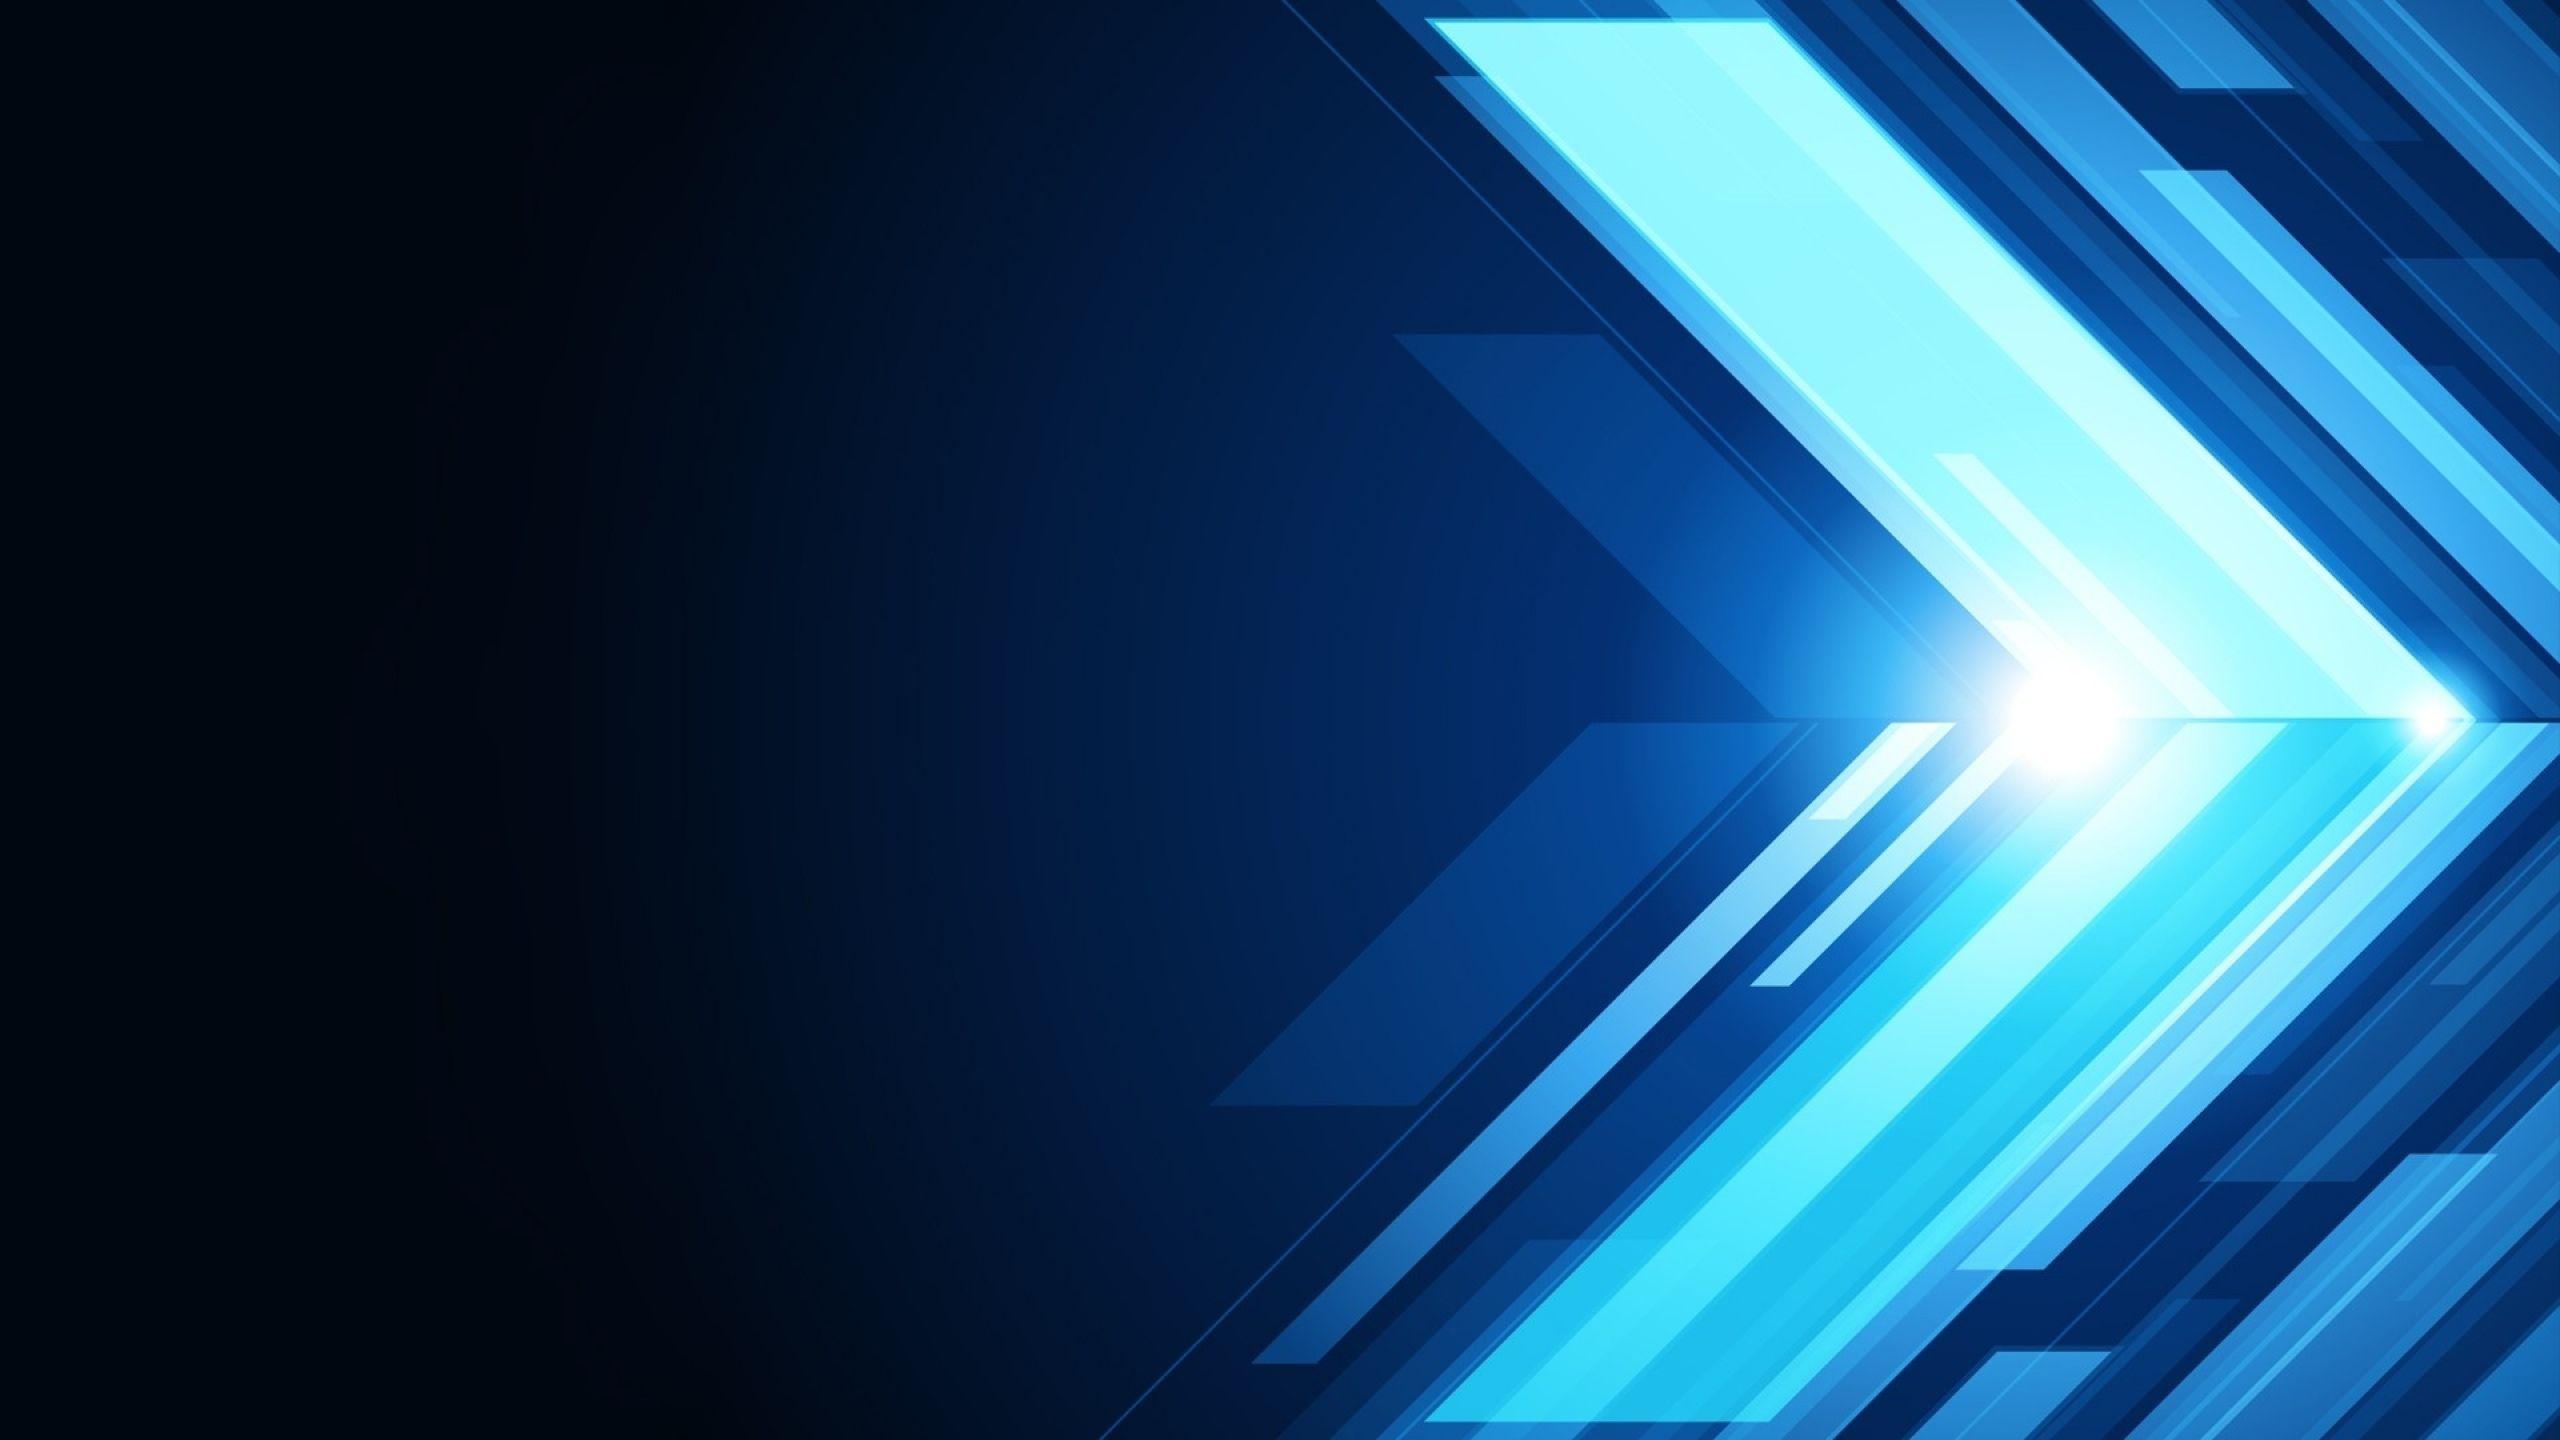 2560x1440 Blue Hd Wallpapers Top Free 2560x1440 Blue Hd Backgrounds Wallpaperaccess